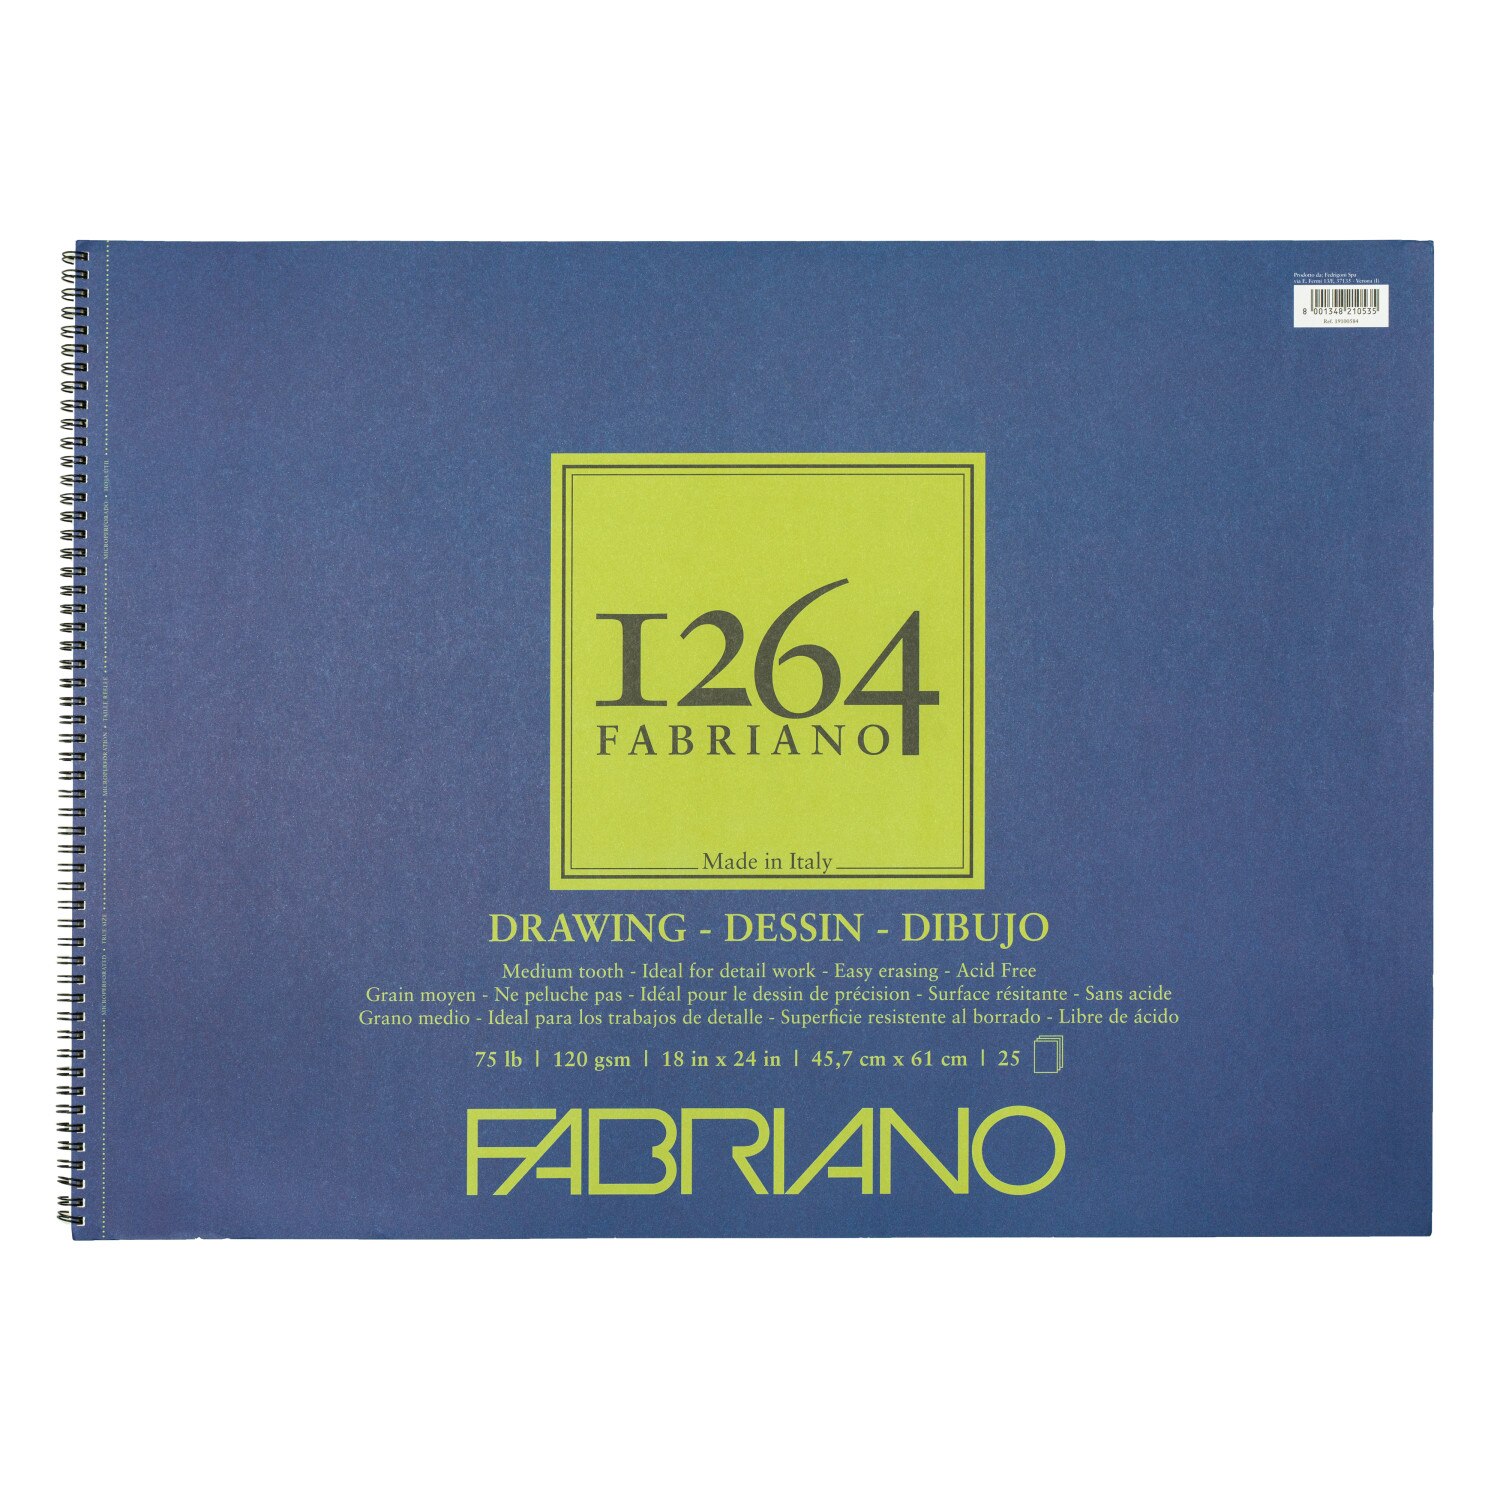 Fabriano 1264 Drawing Spiral bound Pad 18"x24"